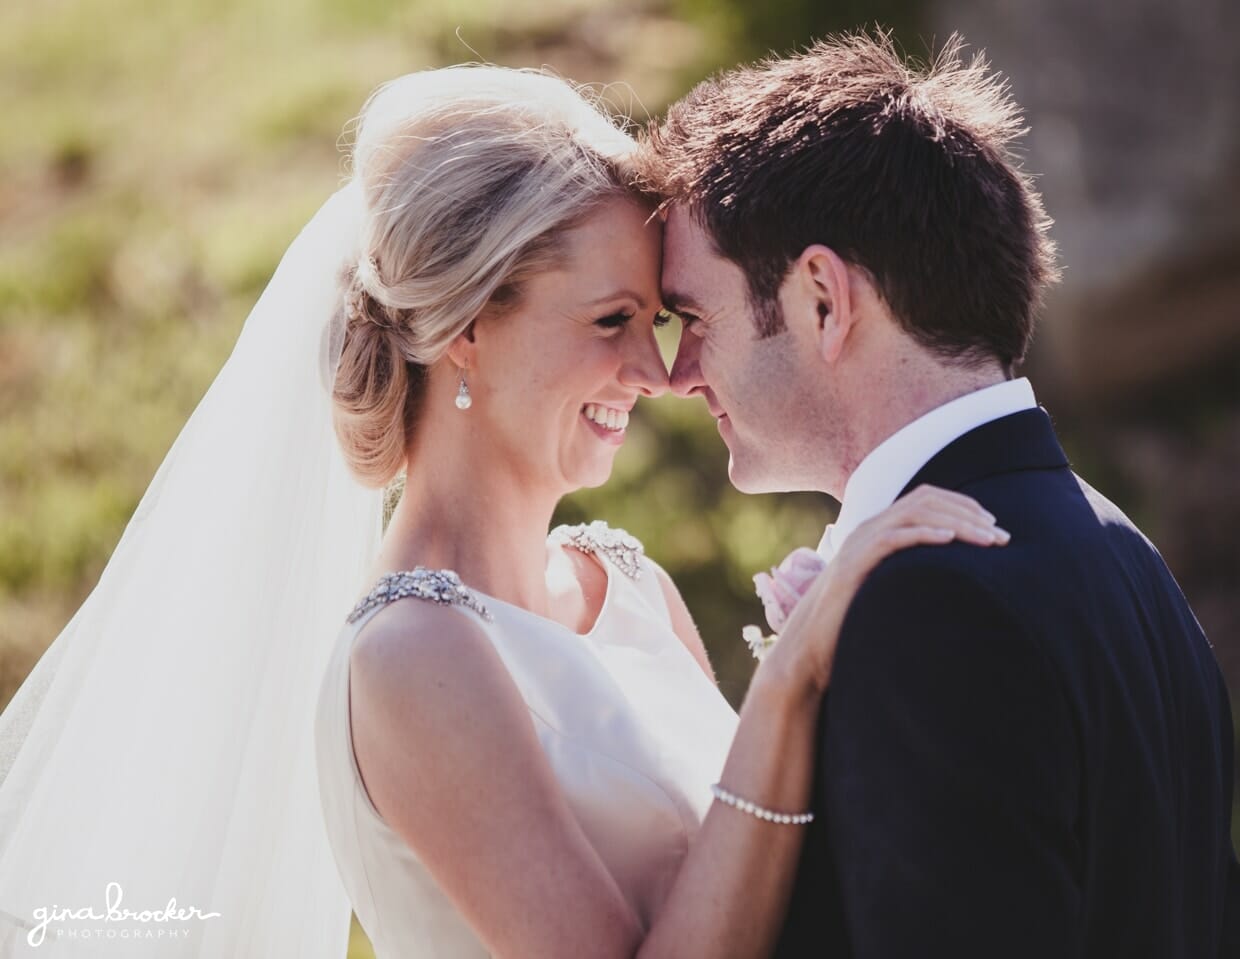 A sweet and natural portrait of a bride and groom during their classic garden wedding